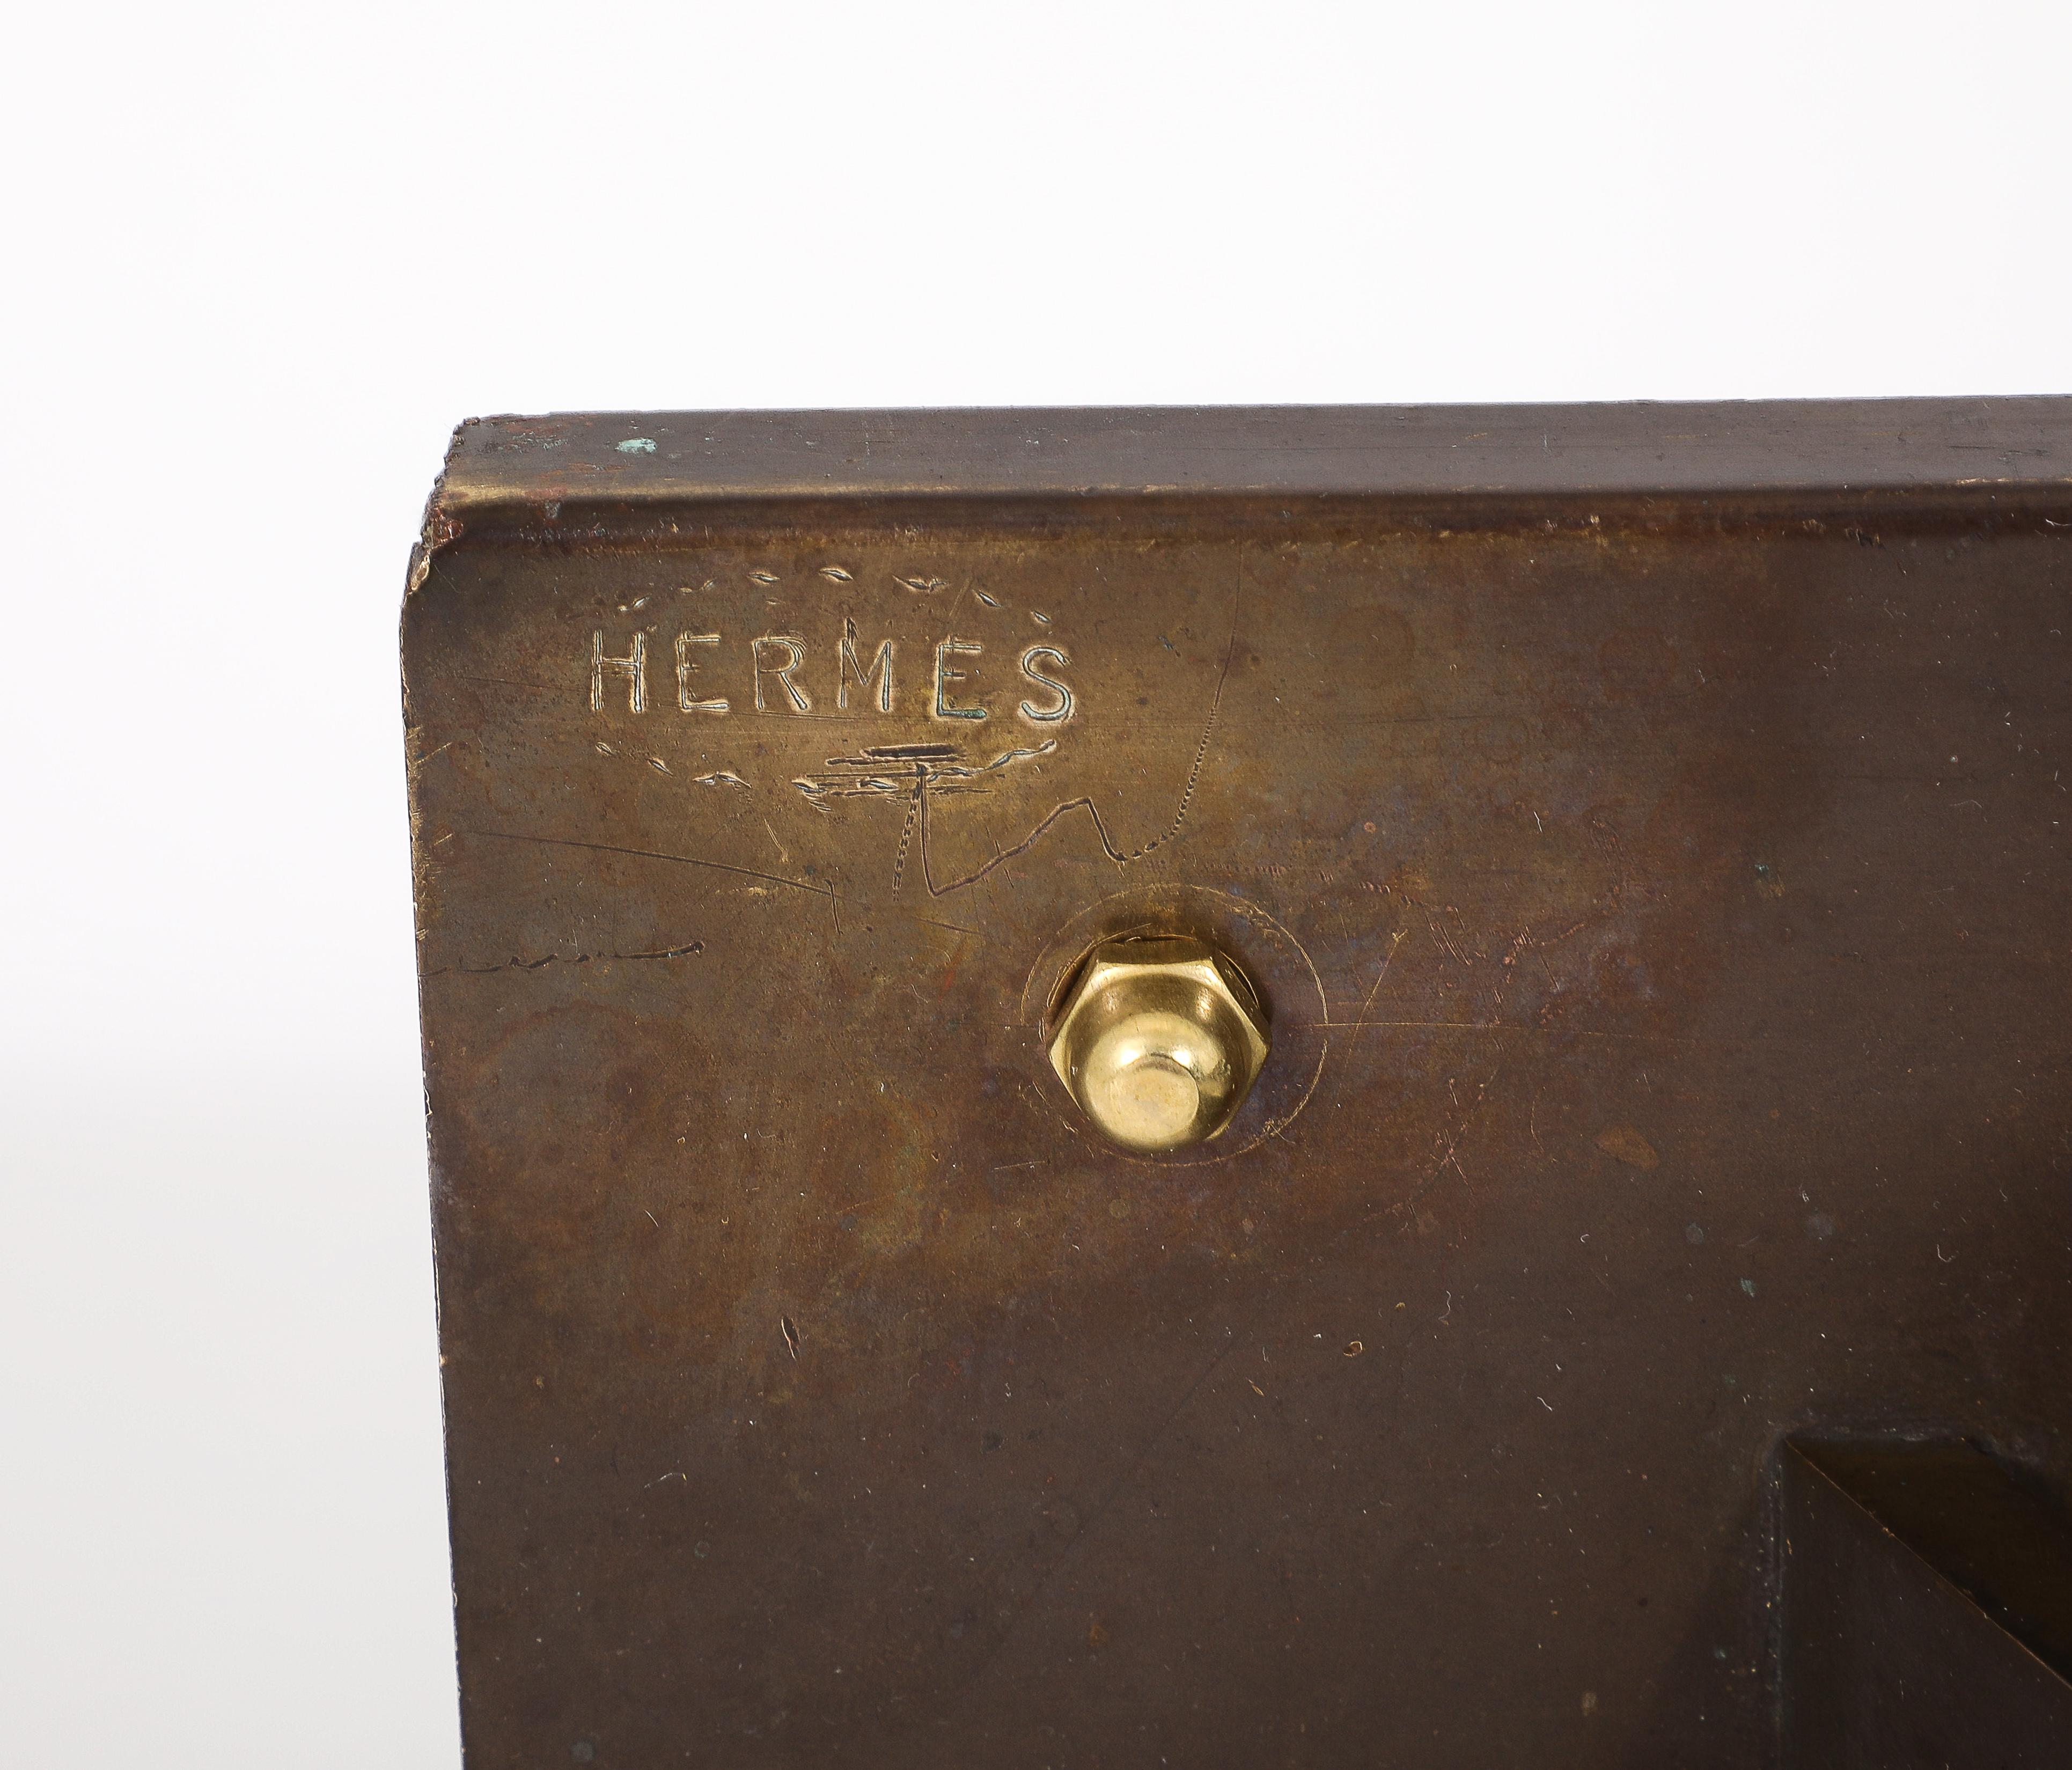 Rare bronze coatrack from a Hermès store display, Great for a chic coatroom or used with a glass atop the triangles it could make an elegant coatrack/Shelf or a striking console.
Signed.
Comes with a heavy duty custom bracket and hardware.